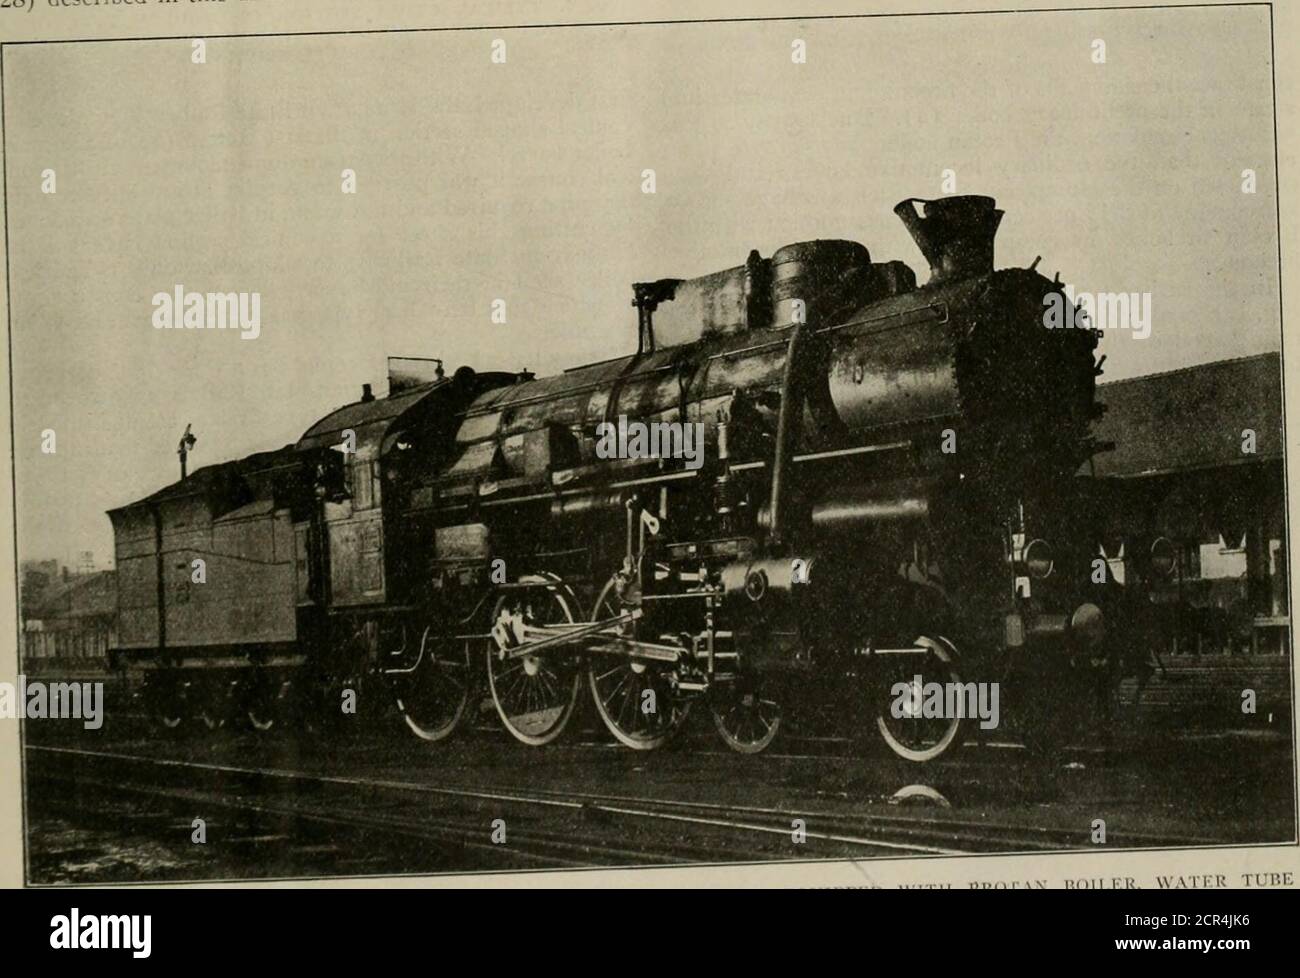 . Railway and locomotive engineering : a practical journal of railway motive power and rolling stock . 4-6-0 Type Locomotive on Hungaria^^JSMe Railways With Brotan-boiler, Loop Water-preheater and Purifierjl^ecz-Mto SystemBy Desider Ledacs Kiss, Mechanical Engineer, Bu^pesl In 1918 traffic on the Hungarian State Railways in-creased ■=0 nnich that it was necessary to increasethe capa-c^ot-the motive power about 30 per cent which led toih^consVruction of the ten-wheel type locomotive (series328rde^cribed in this article. Because of the scarcity of motives on the Hungarian State Railway m 1908 It Stock Photo